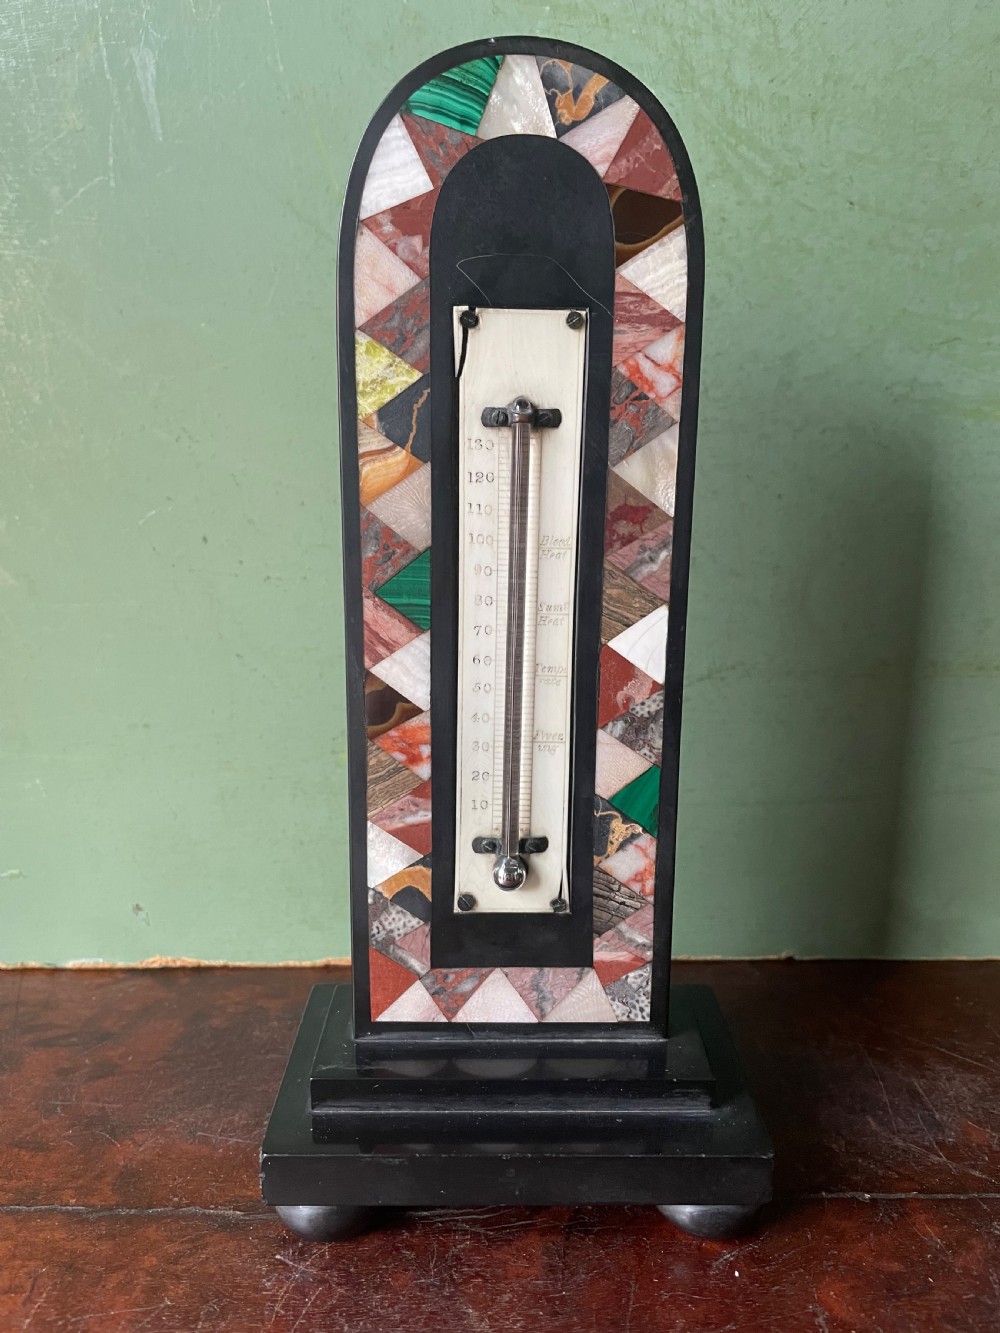 mid c19th derbyshire specimen marble inlaid tabletop thermometer